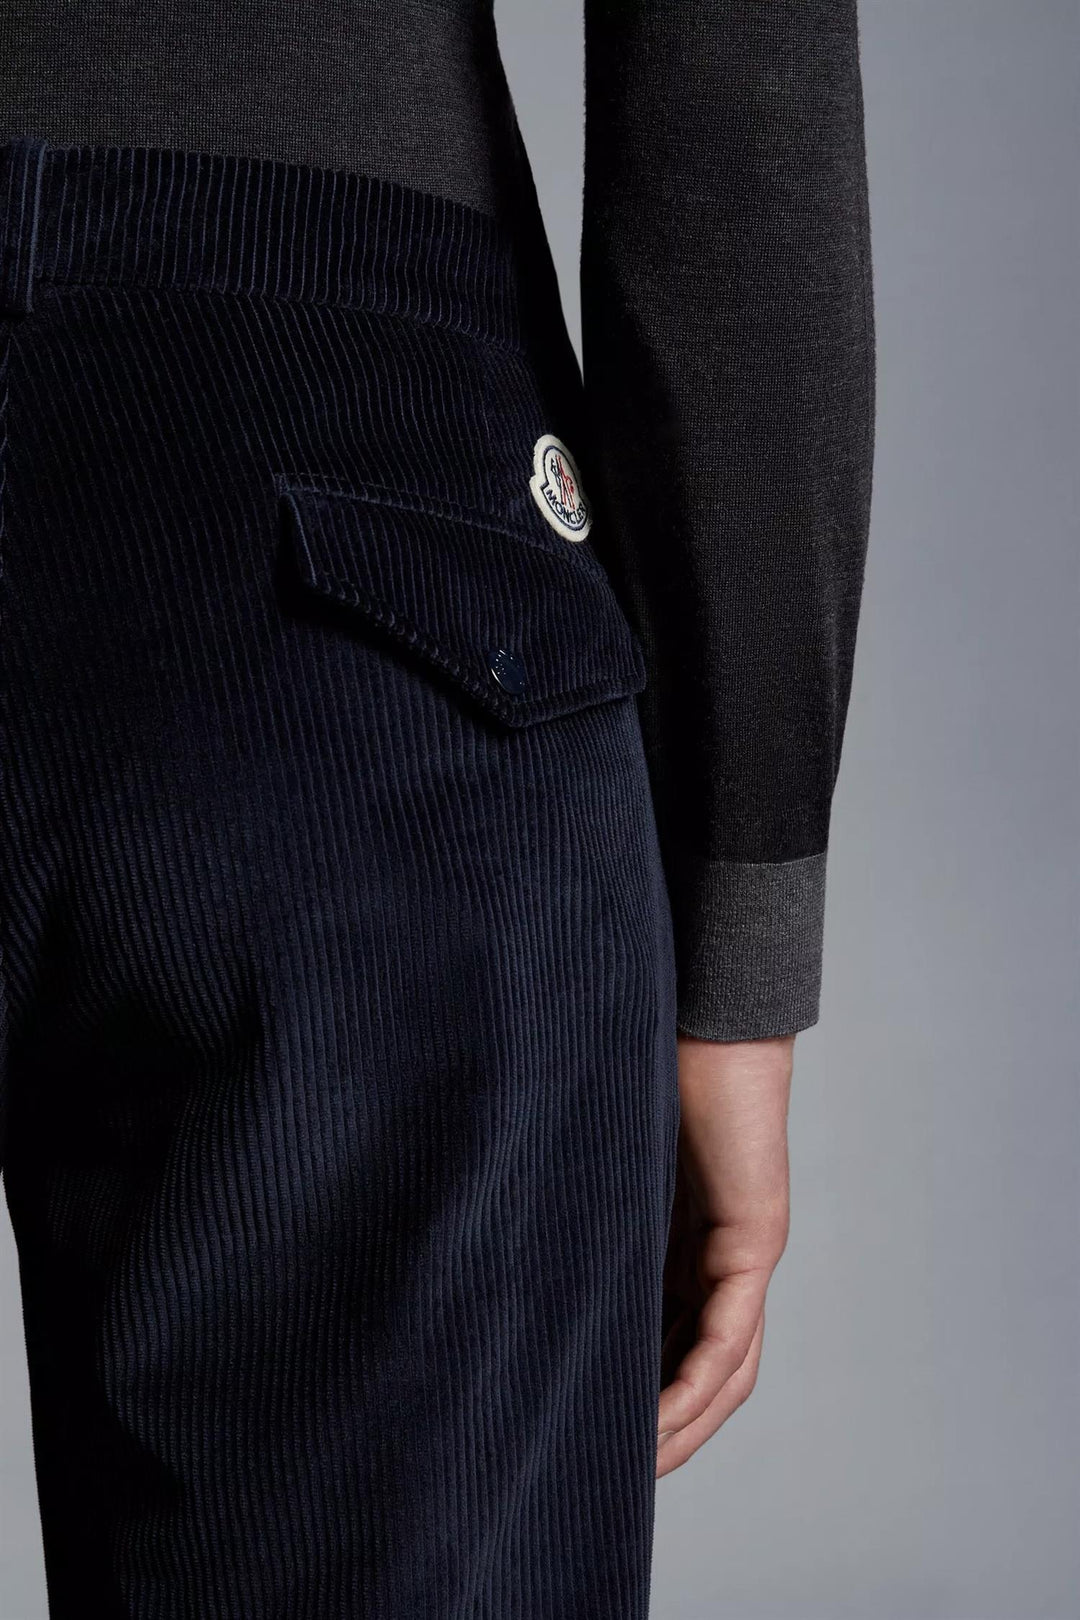 MONCLER - TROUSERS - Dale